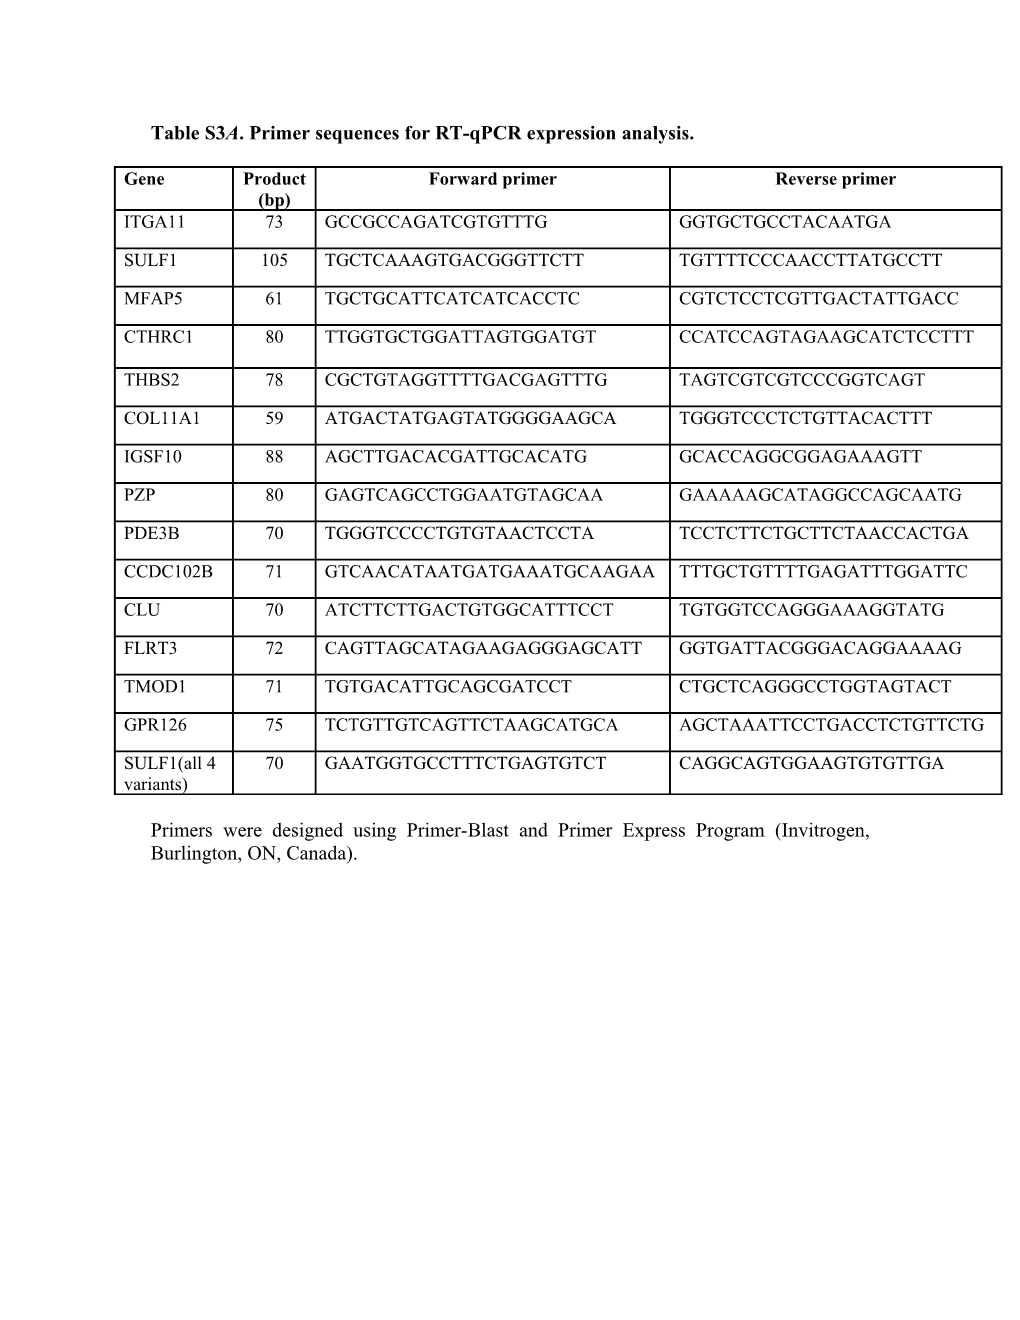 Table S3A. Primer Sequences for RT-Qpcr Expression Analysis